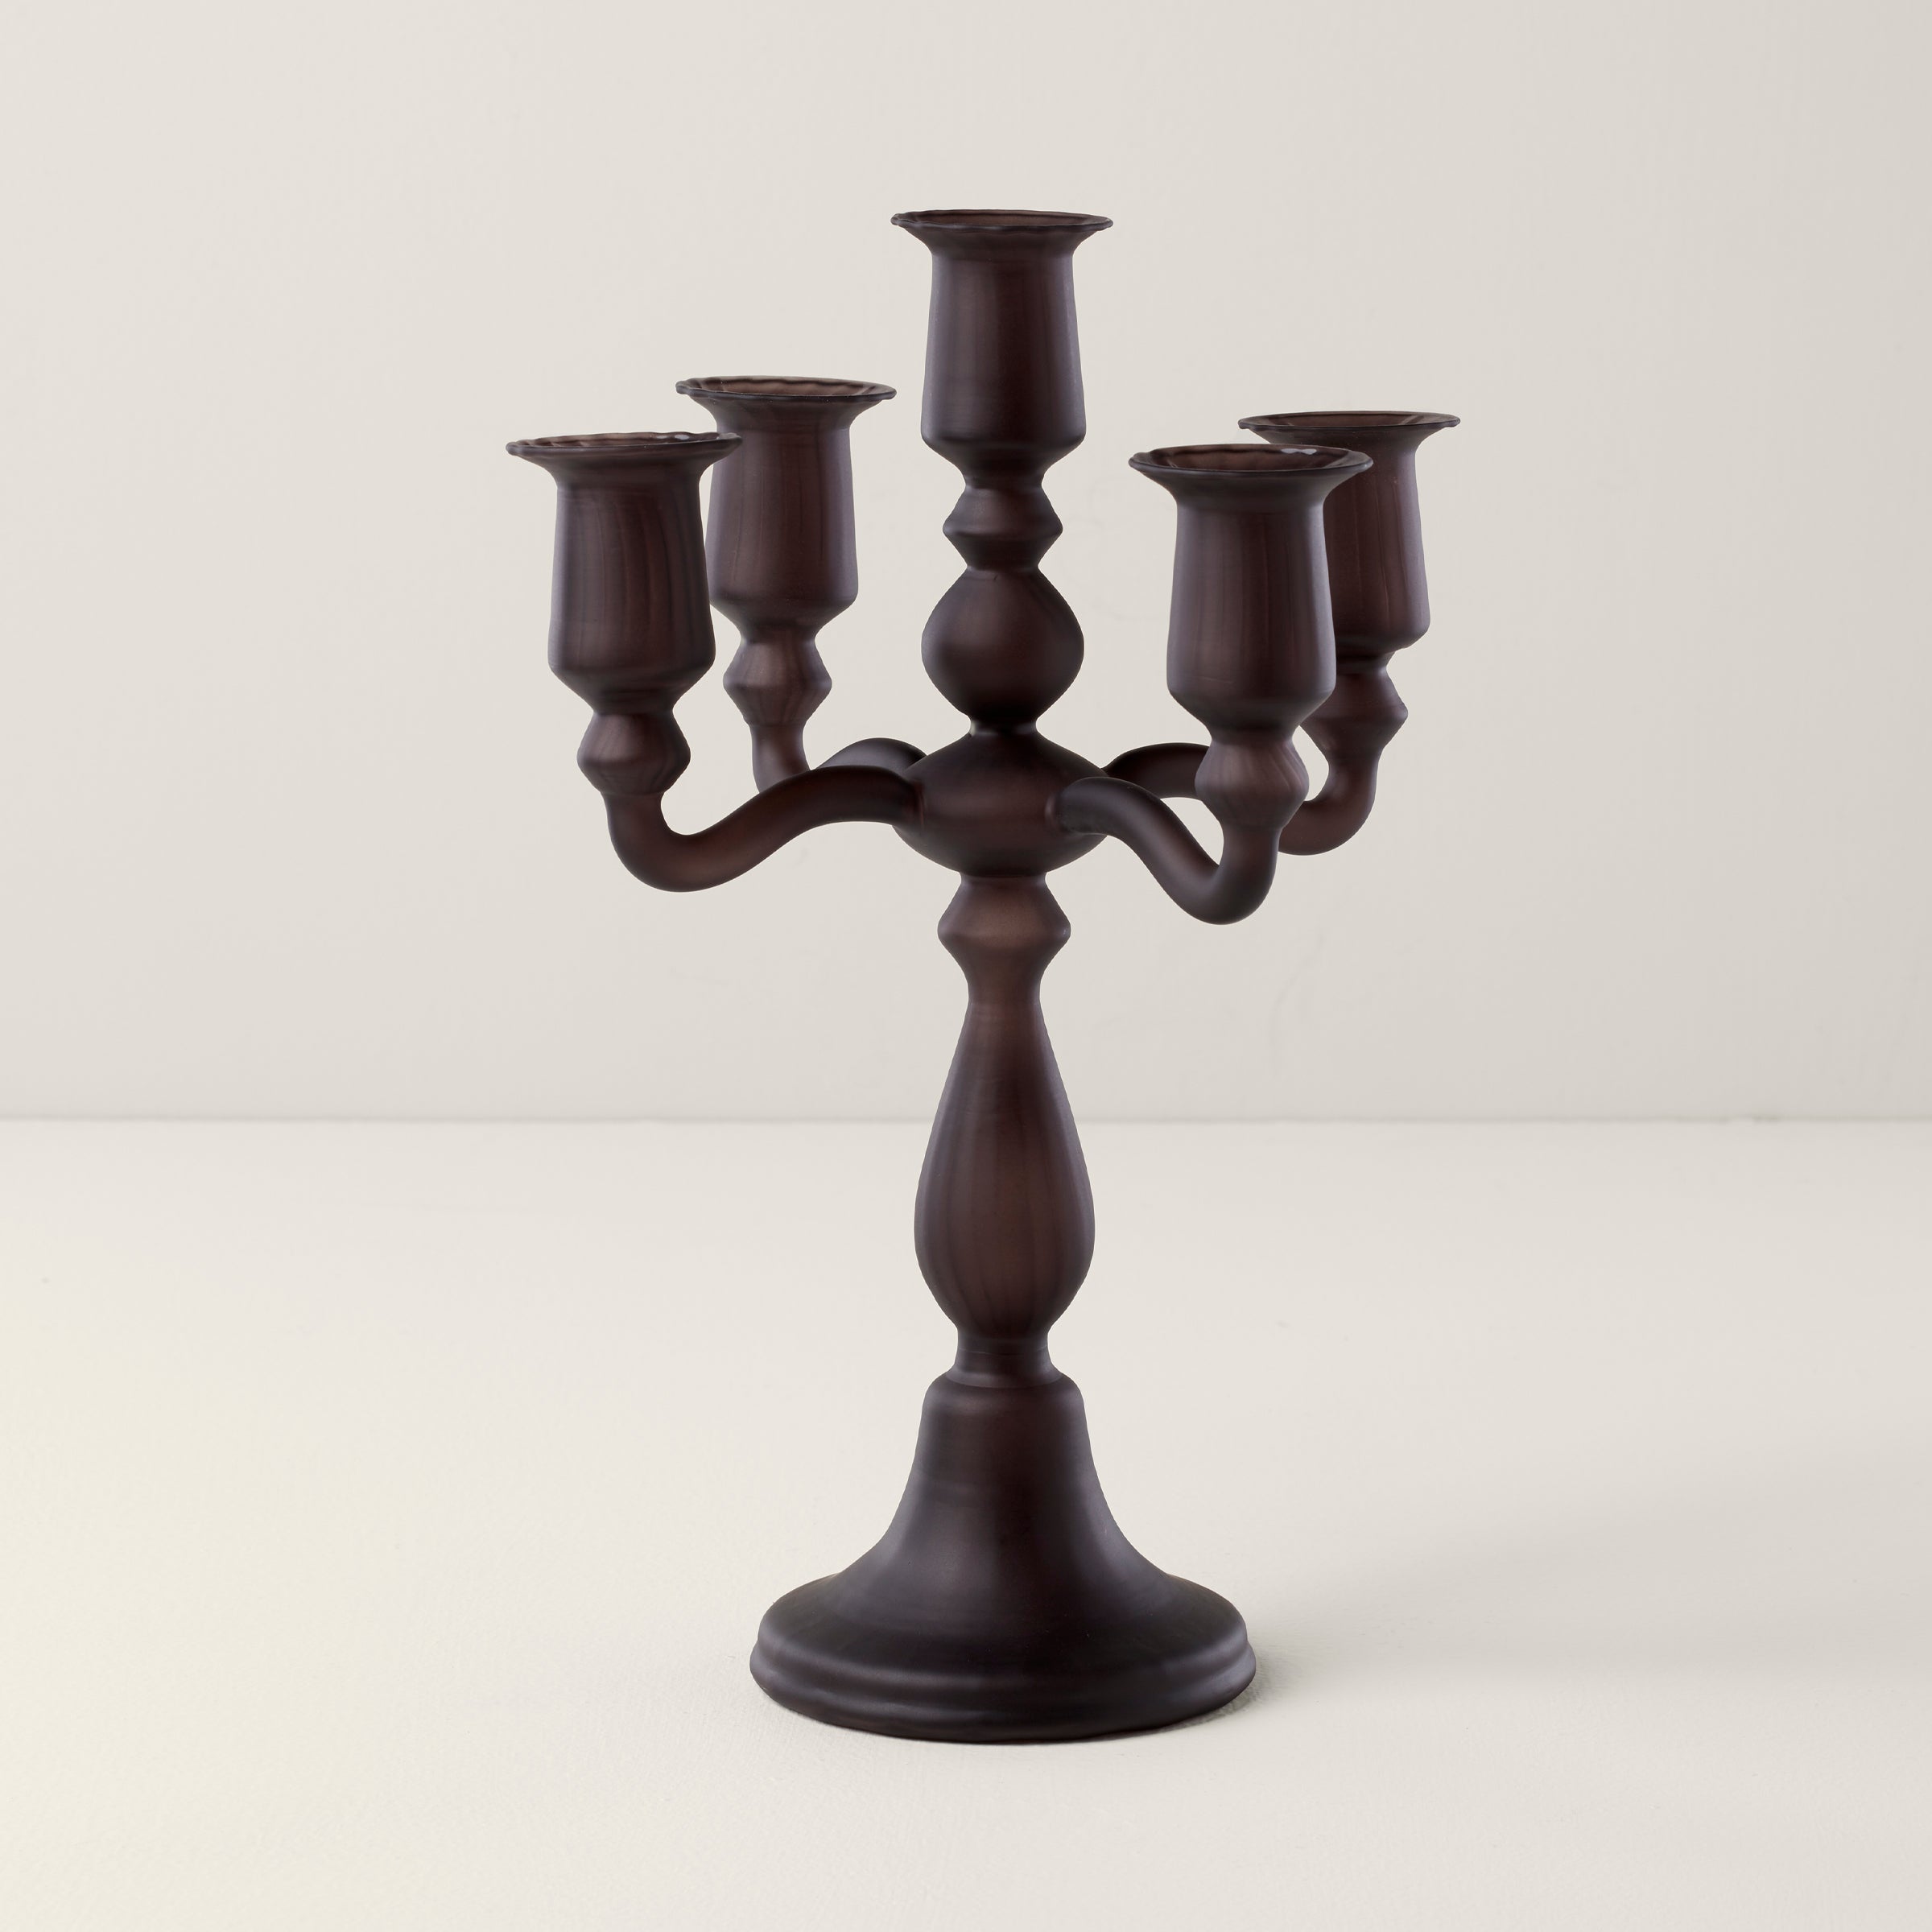 Victorian candelabra  Victorian candle holders, Victorian candles,  Antiqued candle holders